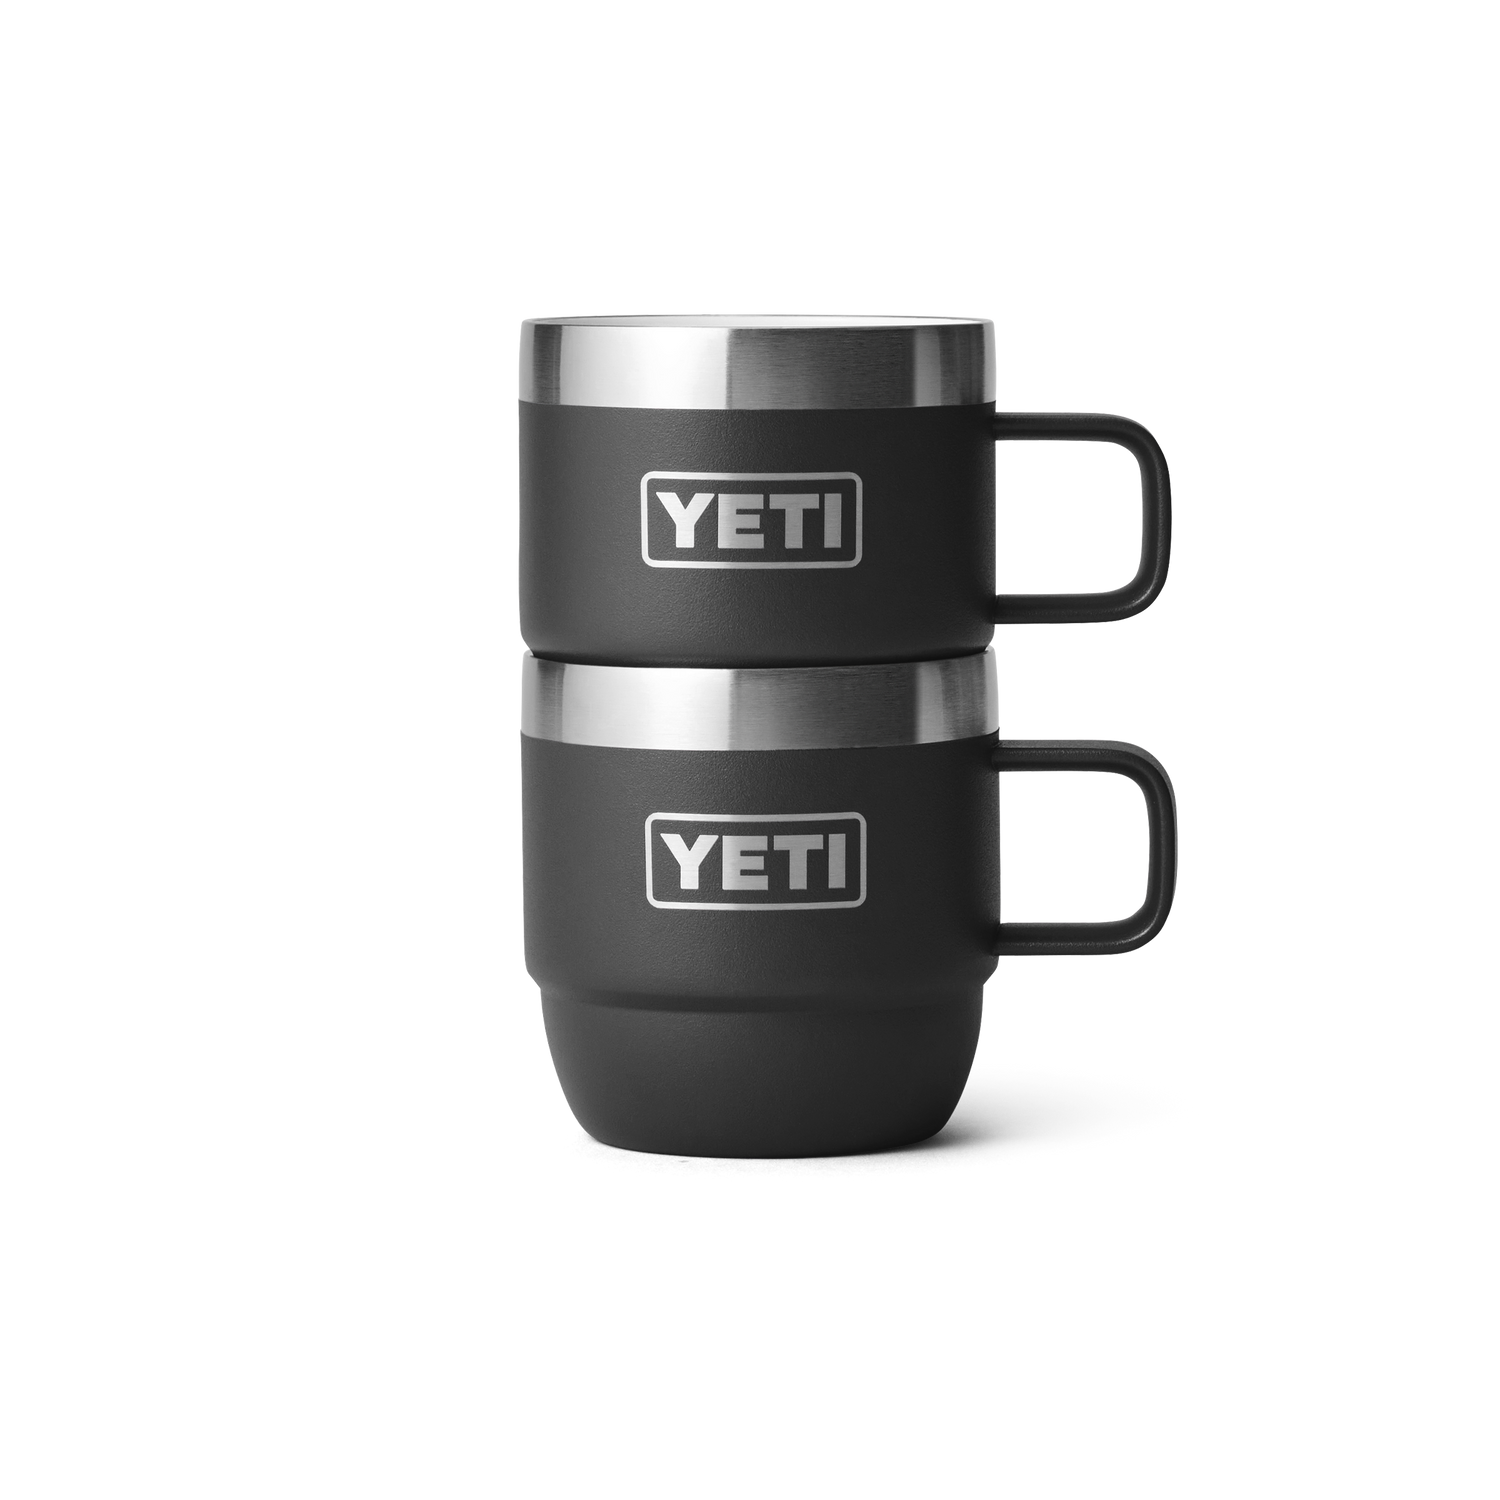 Yeti Rambler 4 oz Stackable Cup, Stainless Steel, Vacuum Insulated Espresso/Coffee Cup, 2 Pack, Seafoam